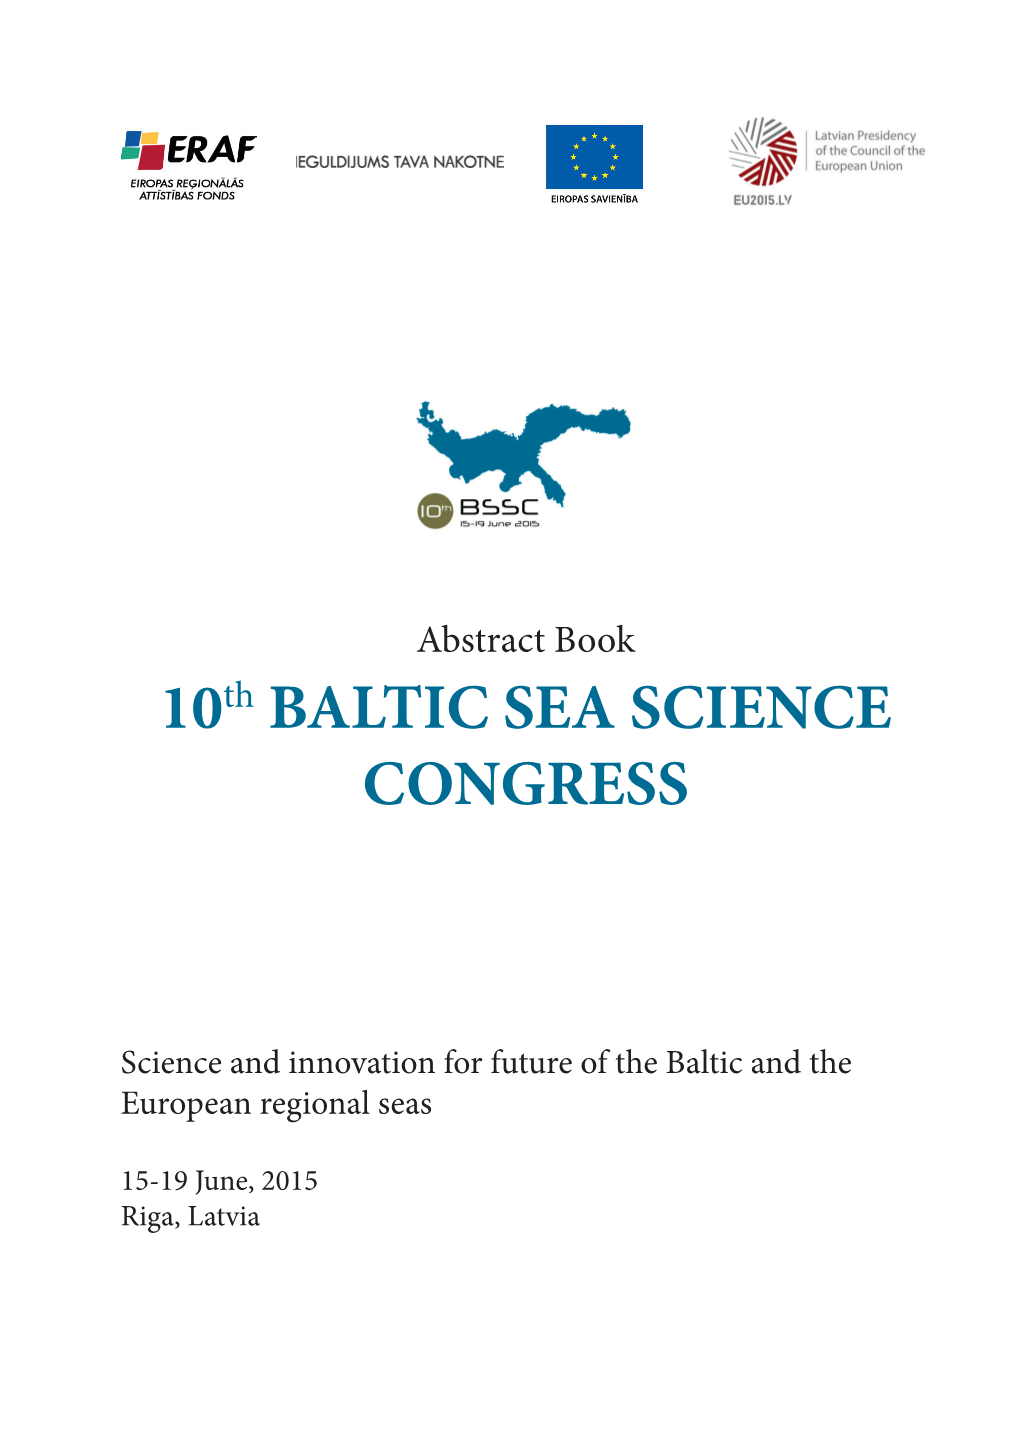 Abstract Book 10Th BALTIC SEA SCIENCE CONGRESS